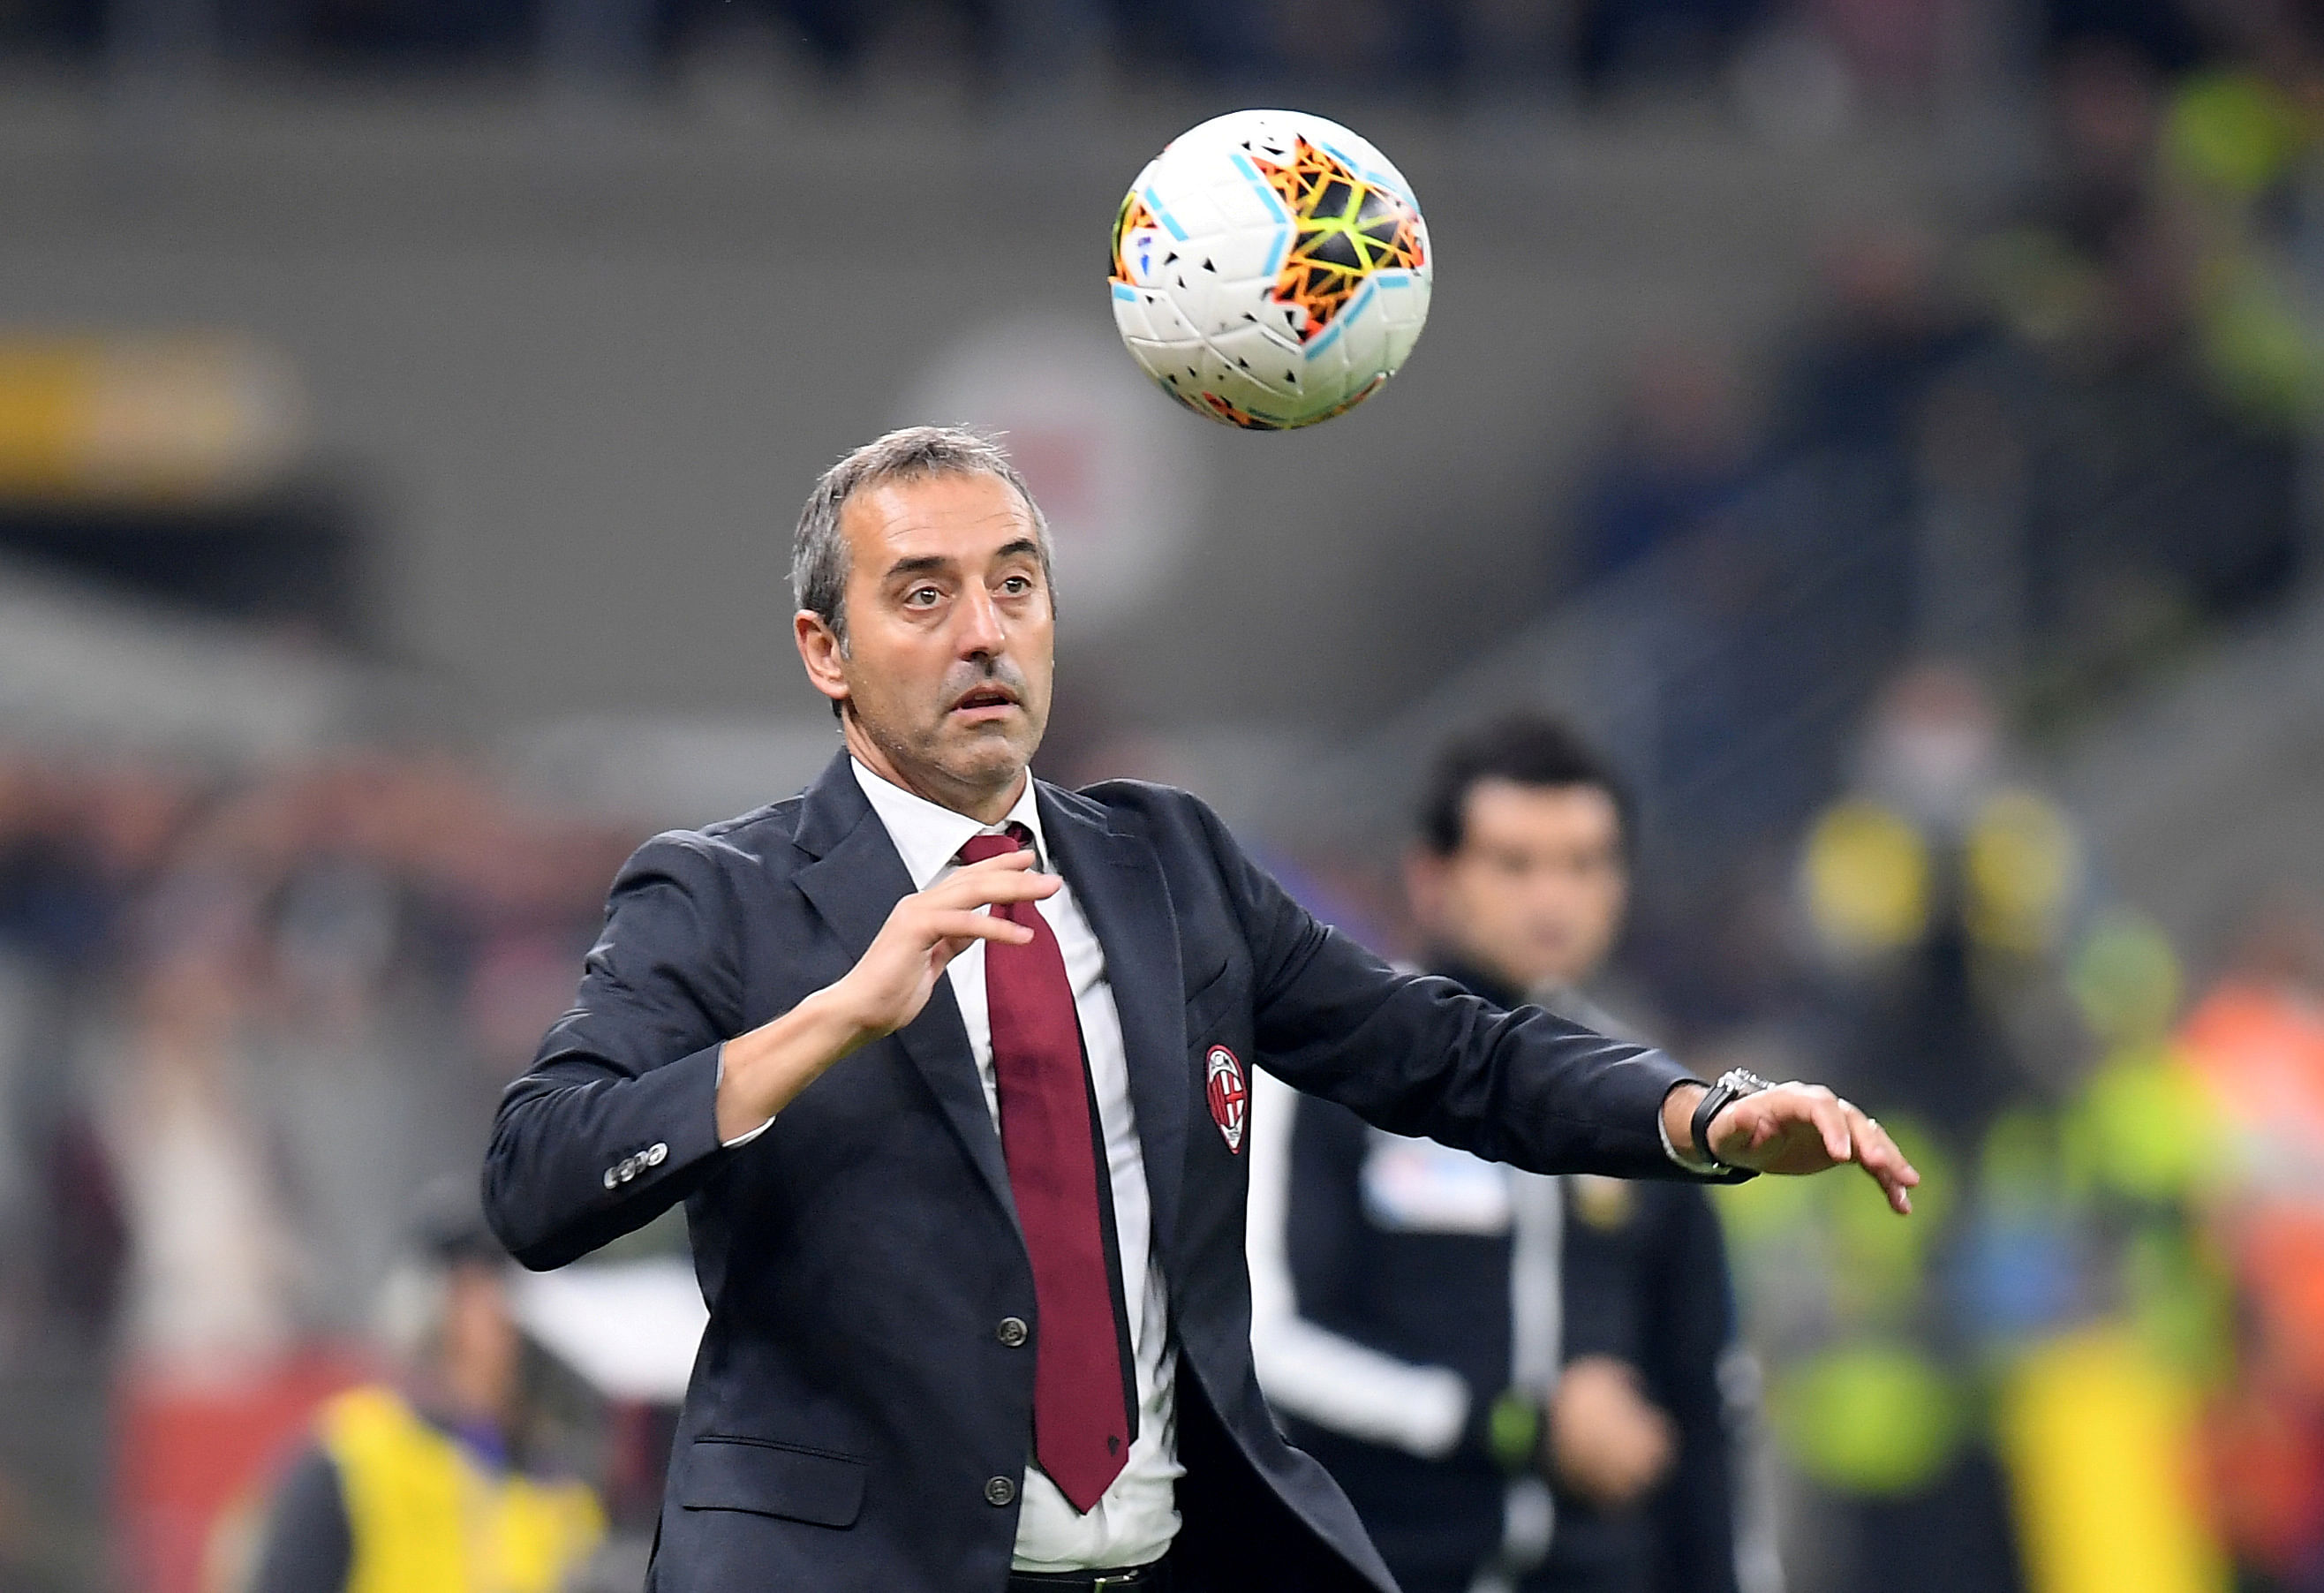 Former AC Milan coach Marco Giampaolo. (Reuters Photo)